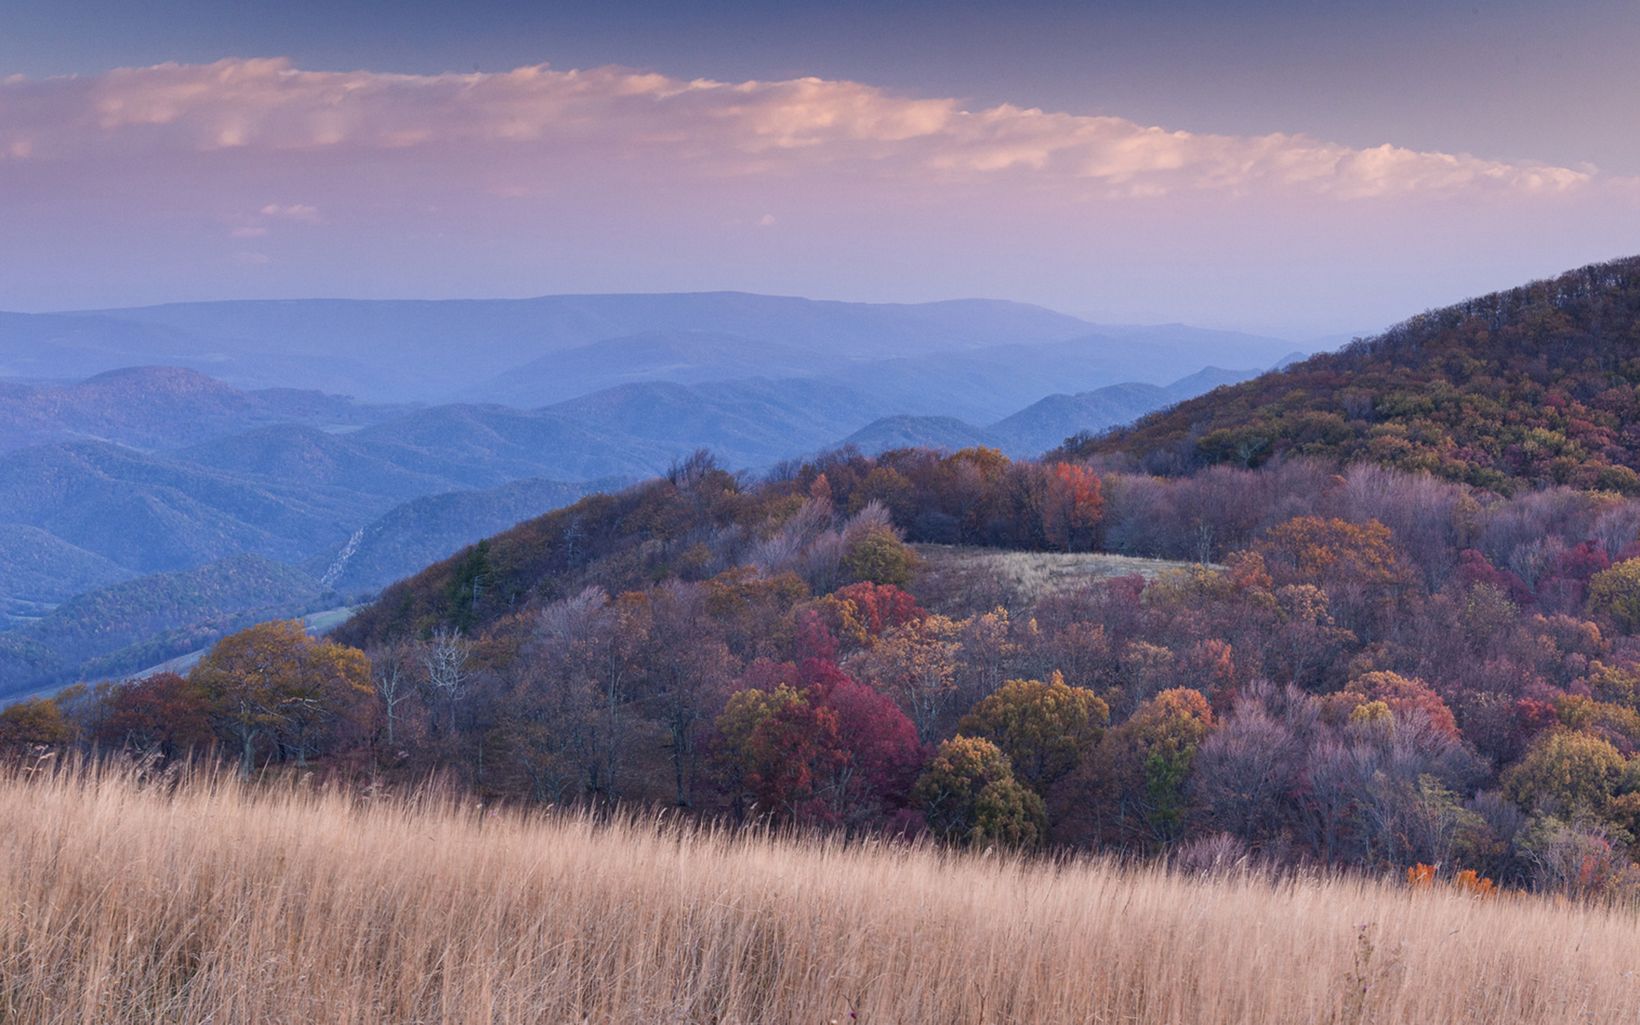 Trees showing late fall color blanket a mountain top. Rolling mountain ridges extend into the horizon. 